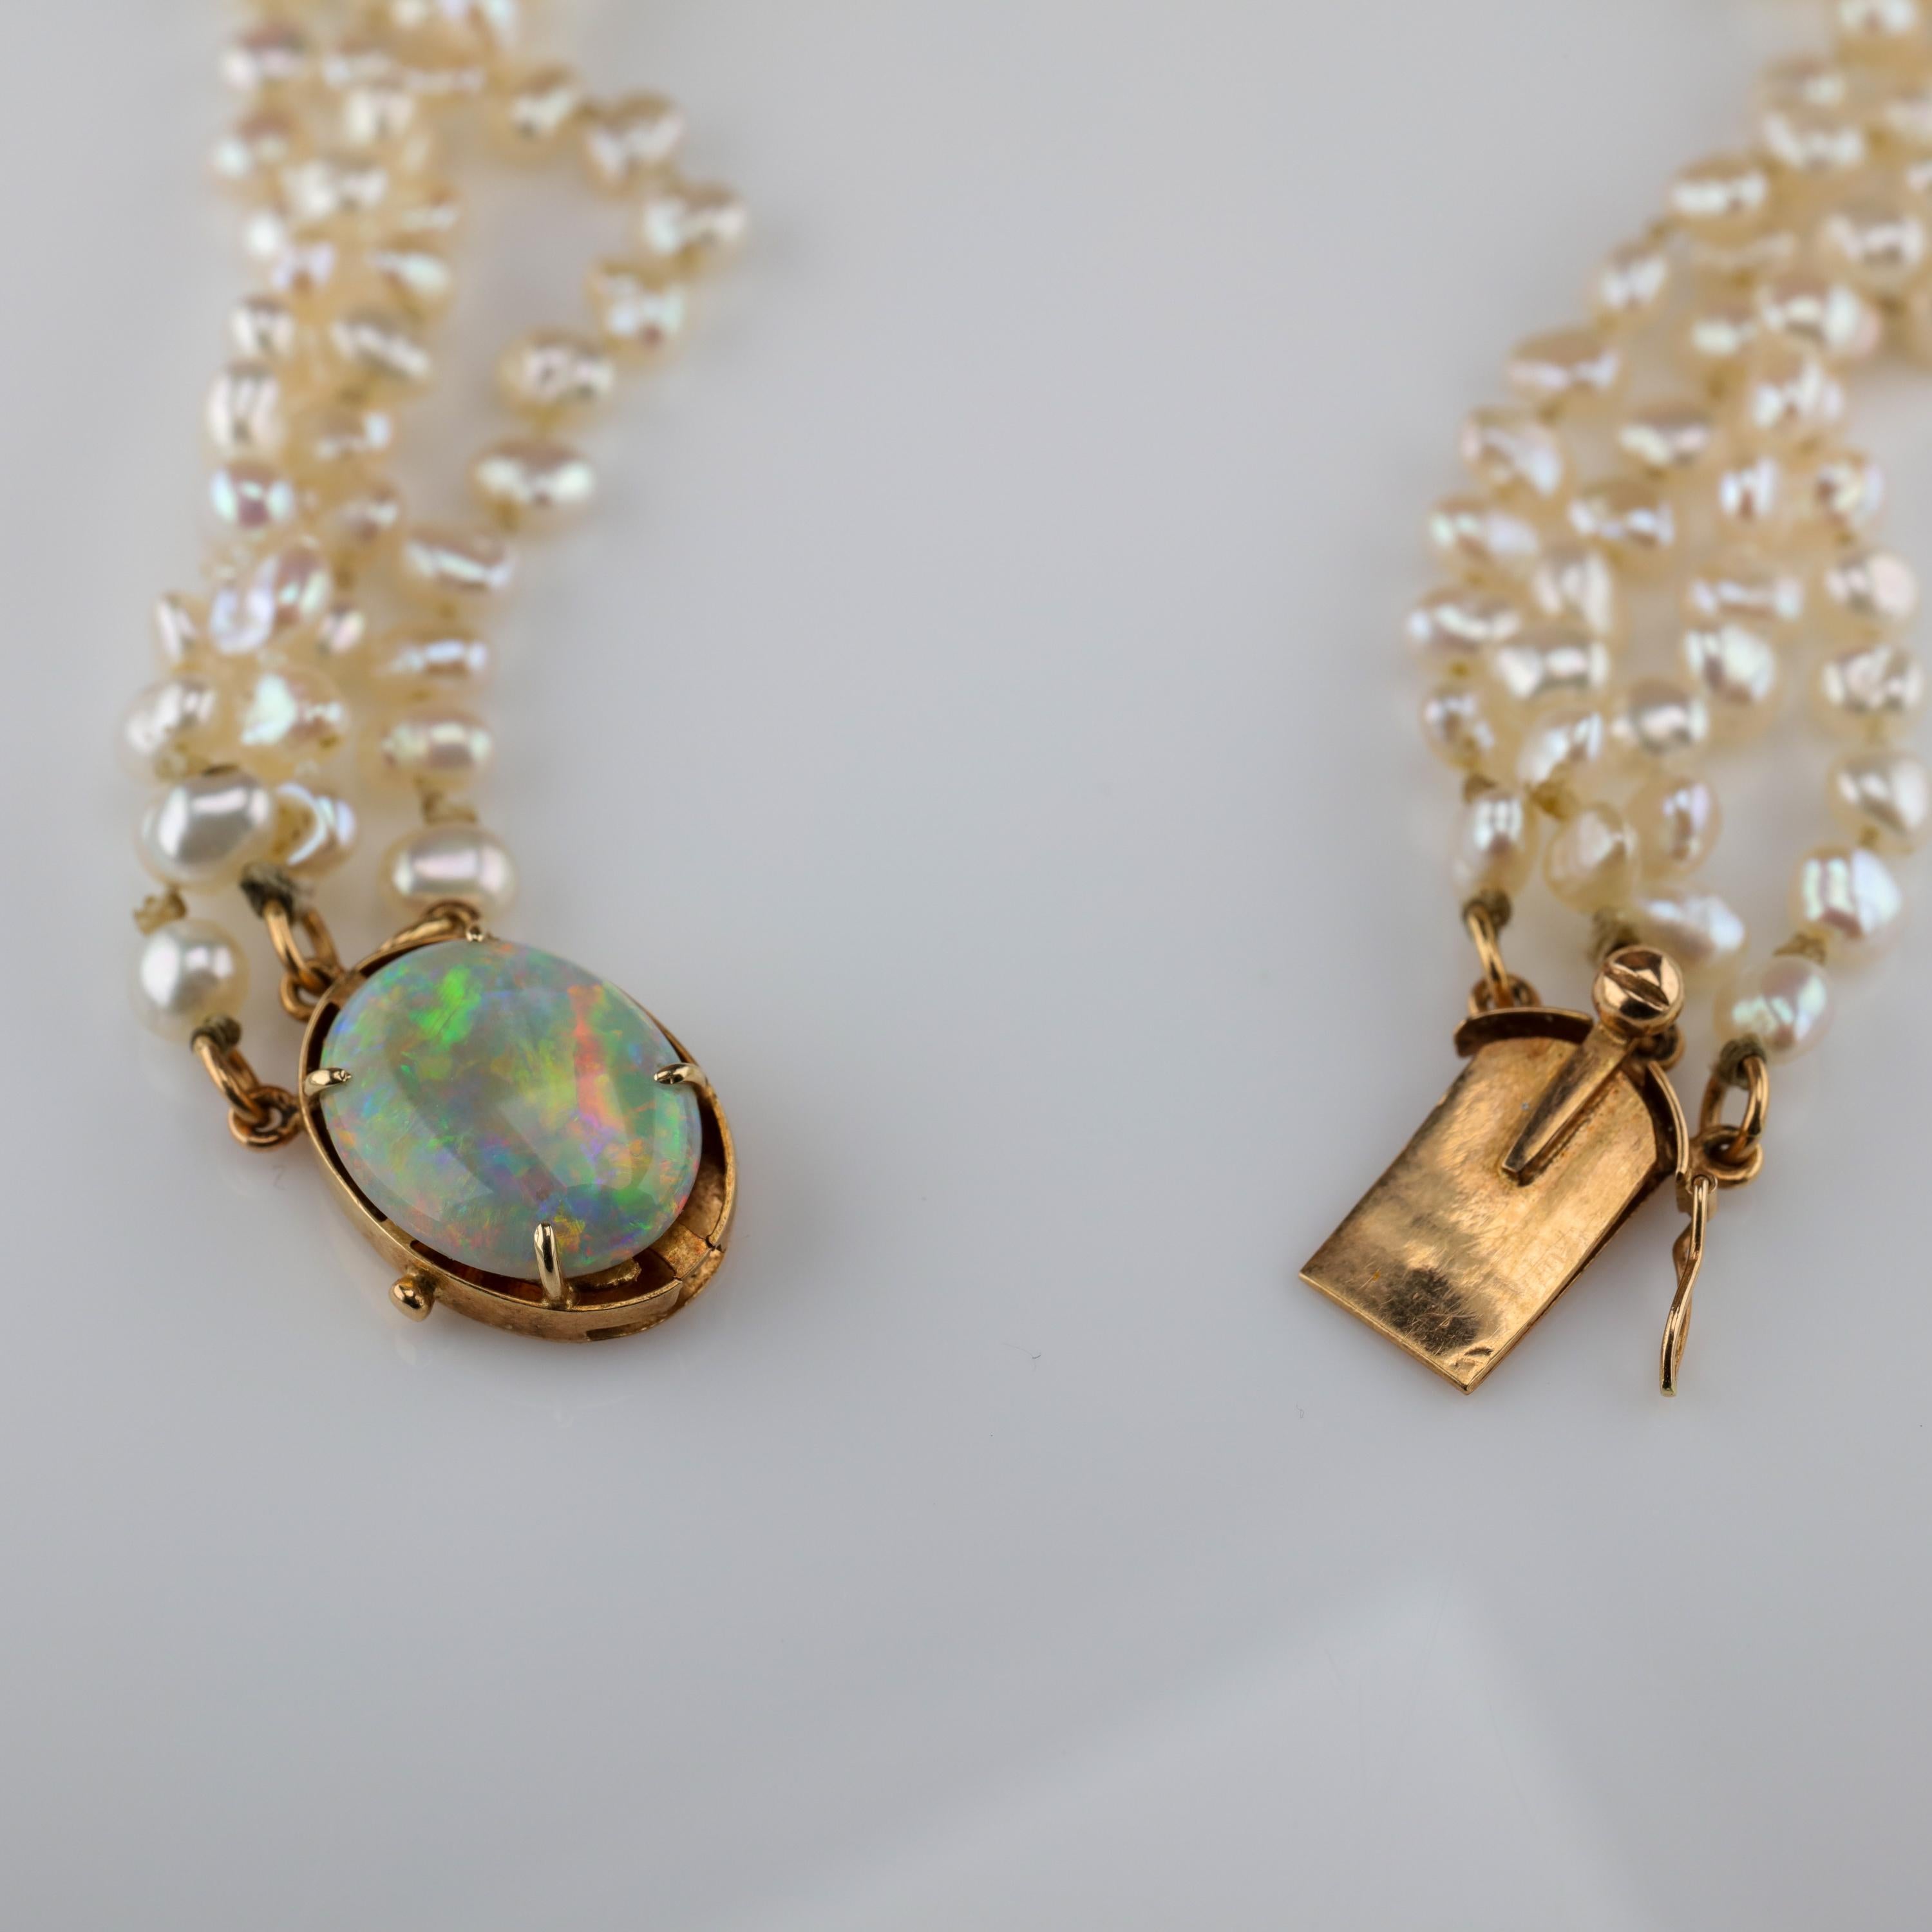 Cabochon Gump's Pearl and Opal Necklace Features Rare & Authentic Biwa Pearls